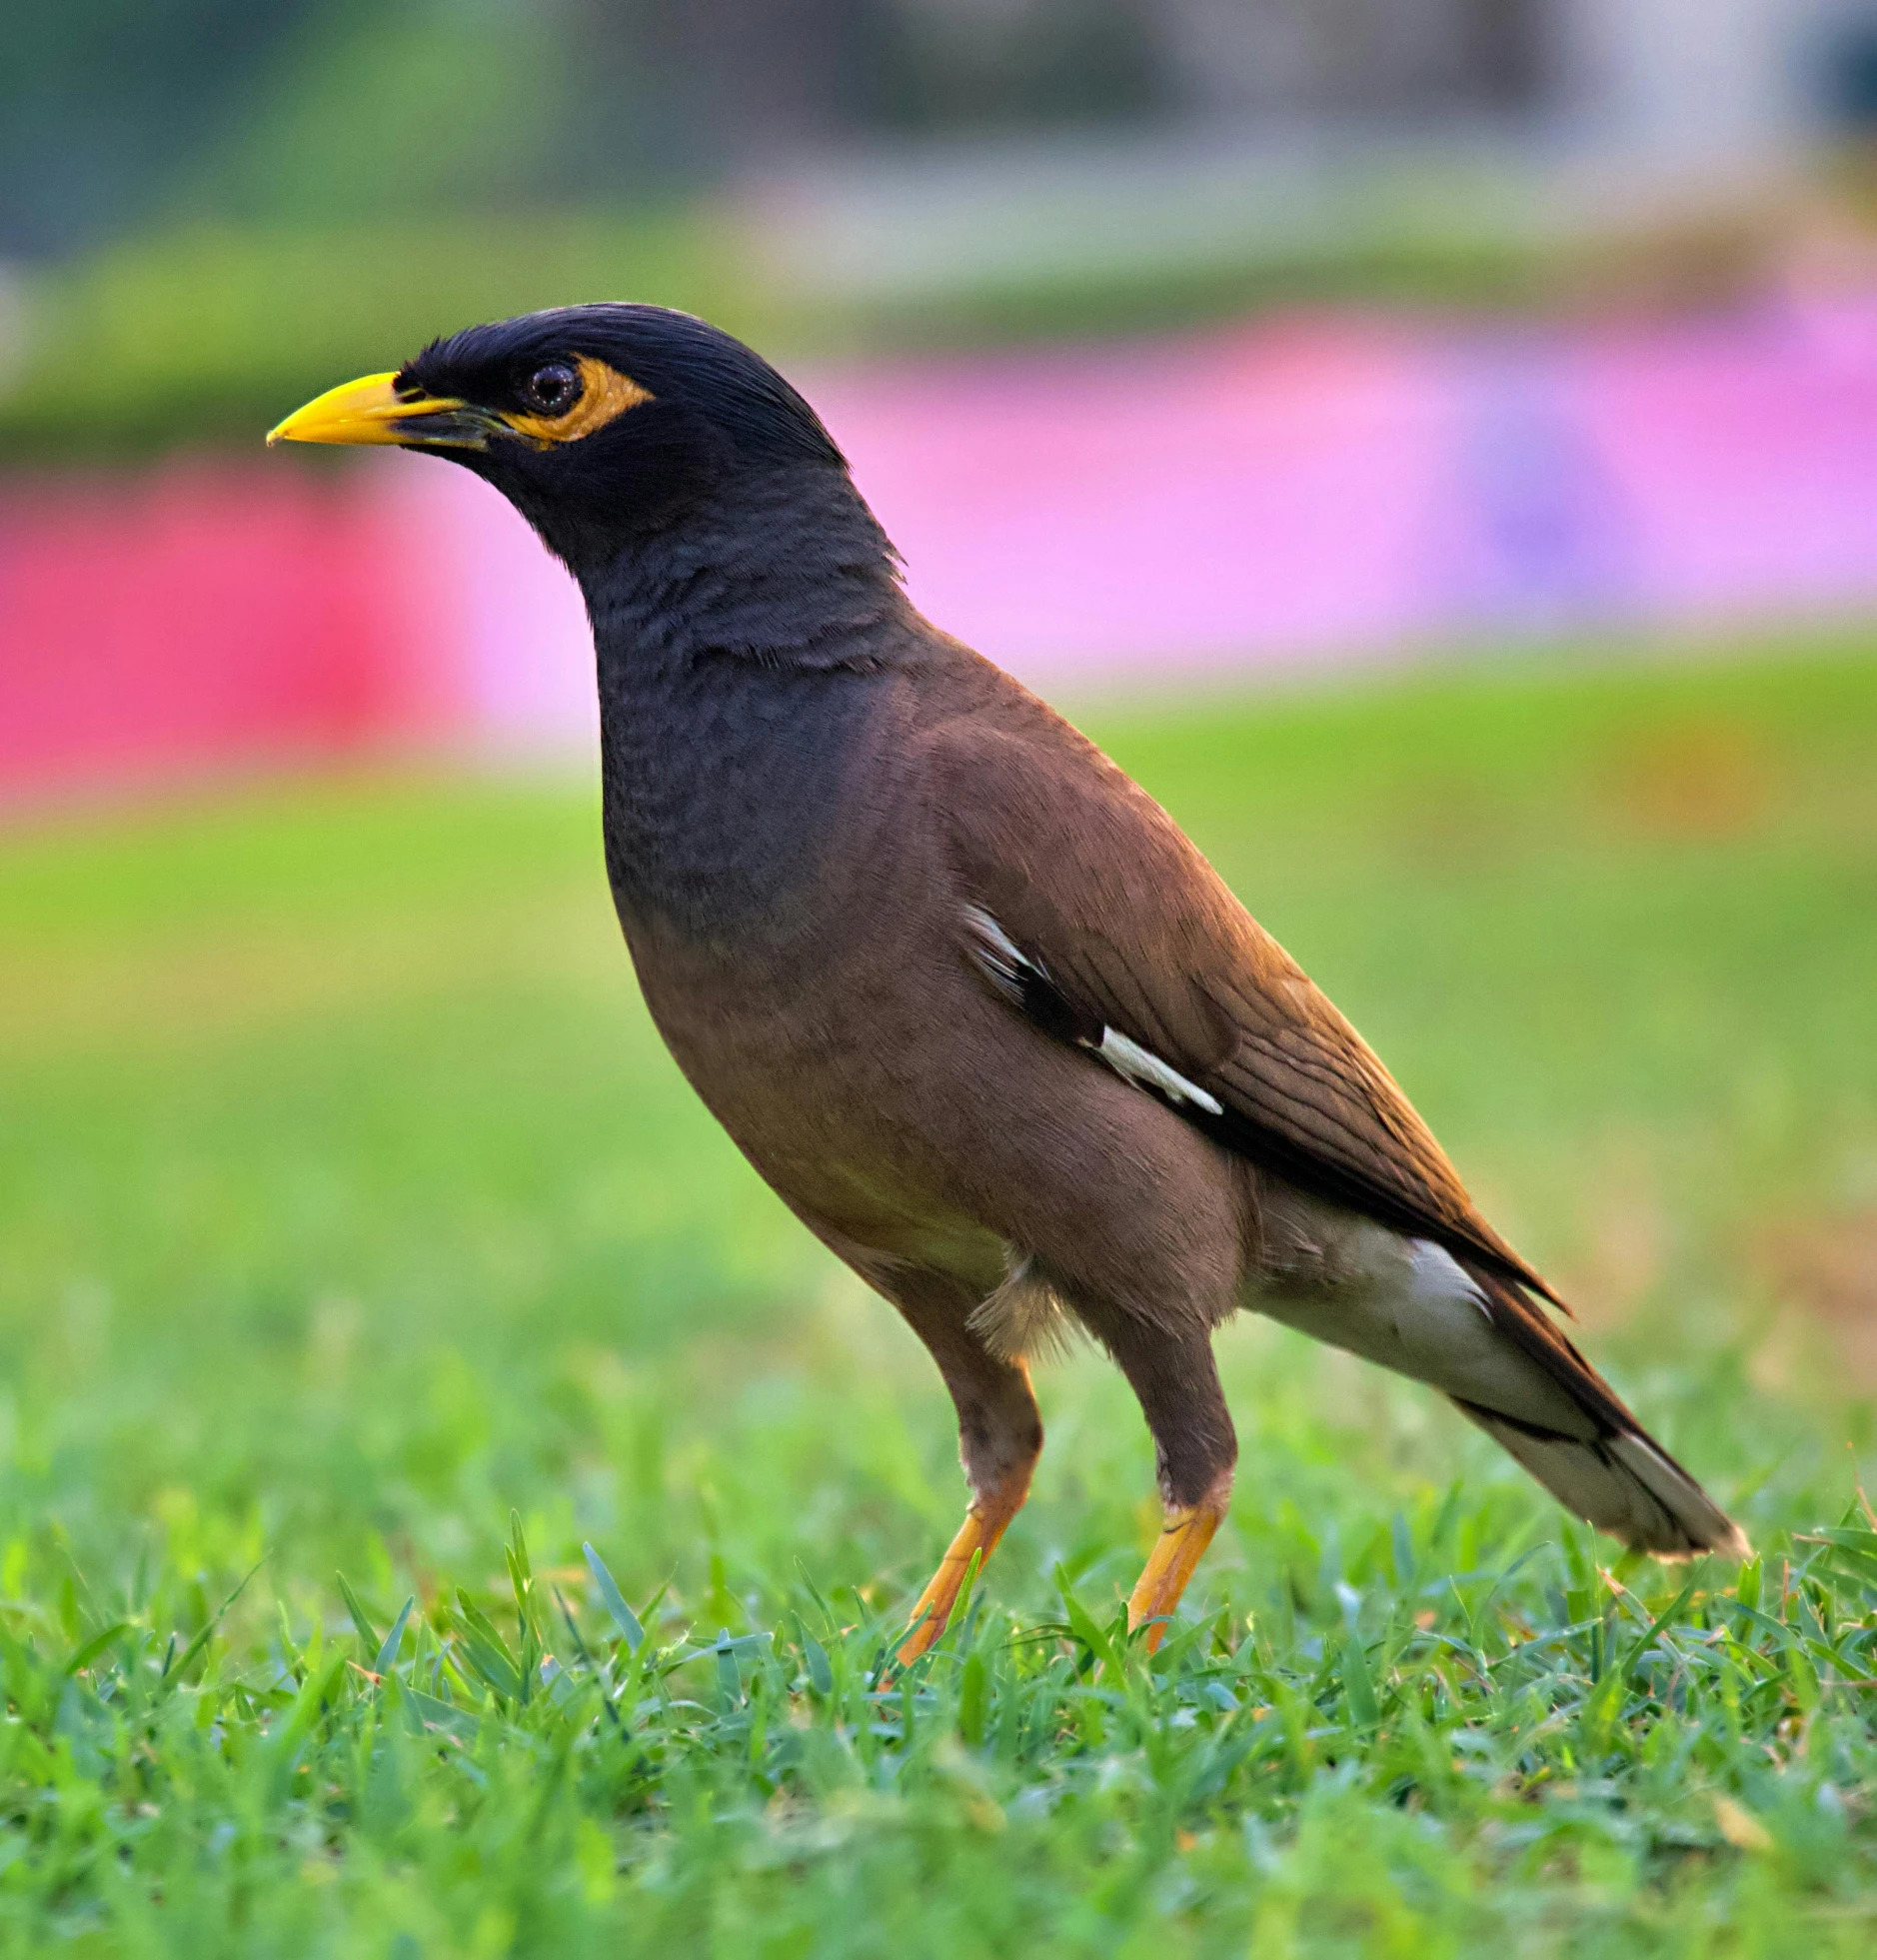 brown and black bird in the middle of a grass field